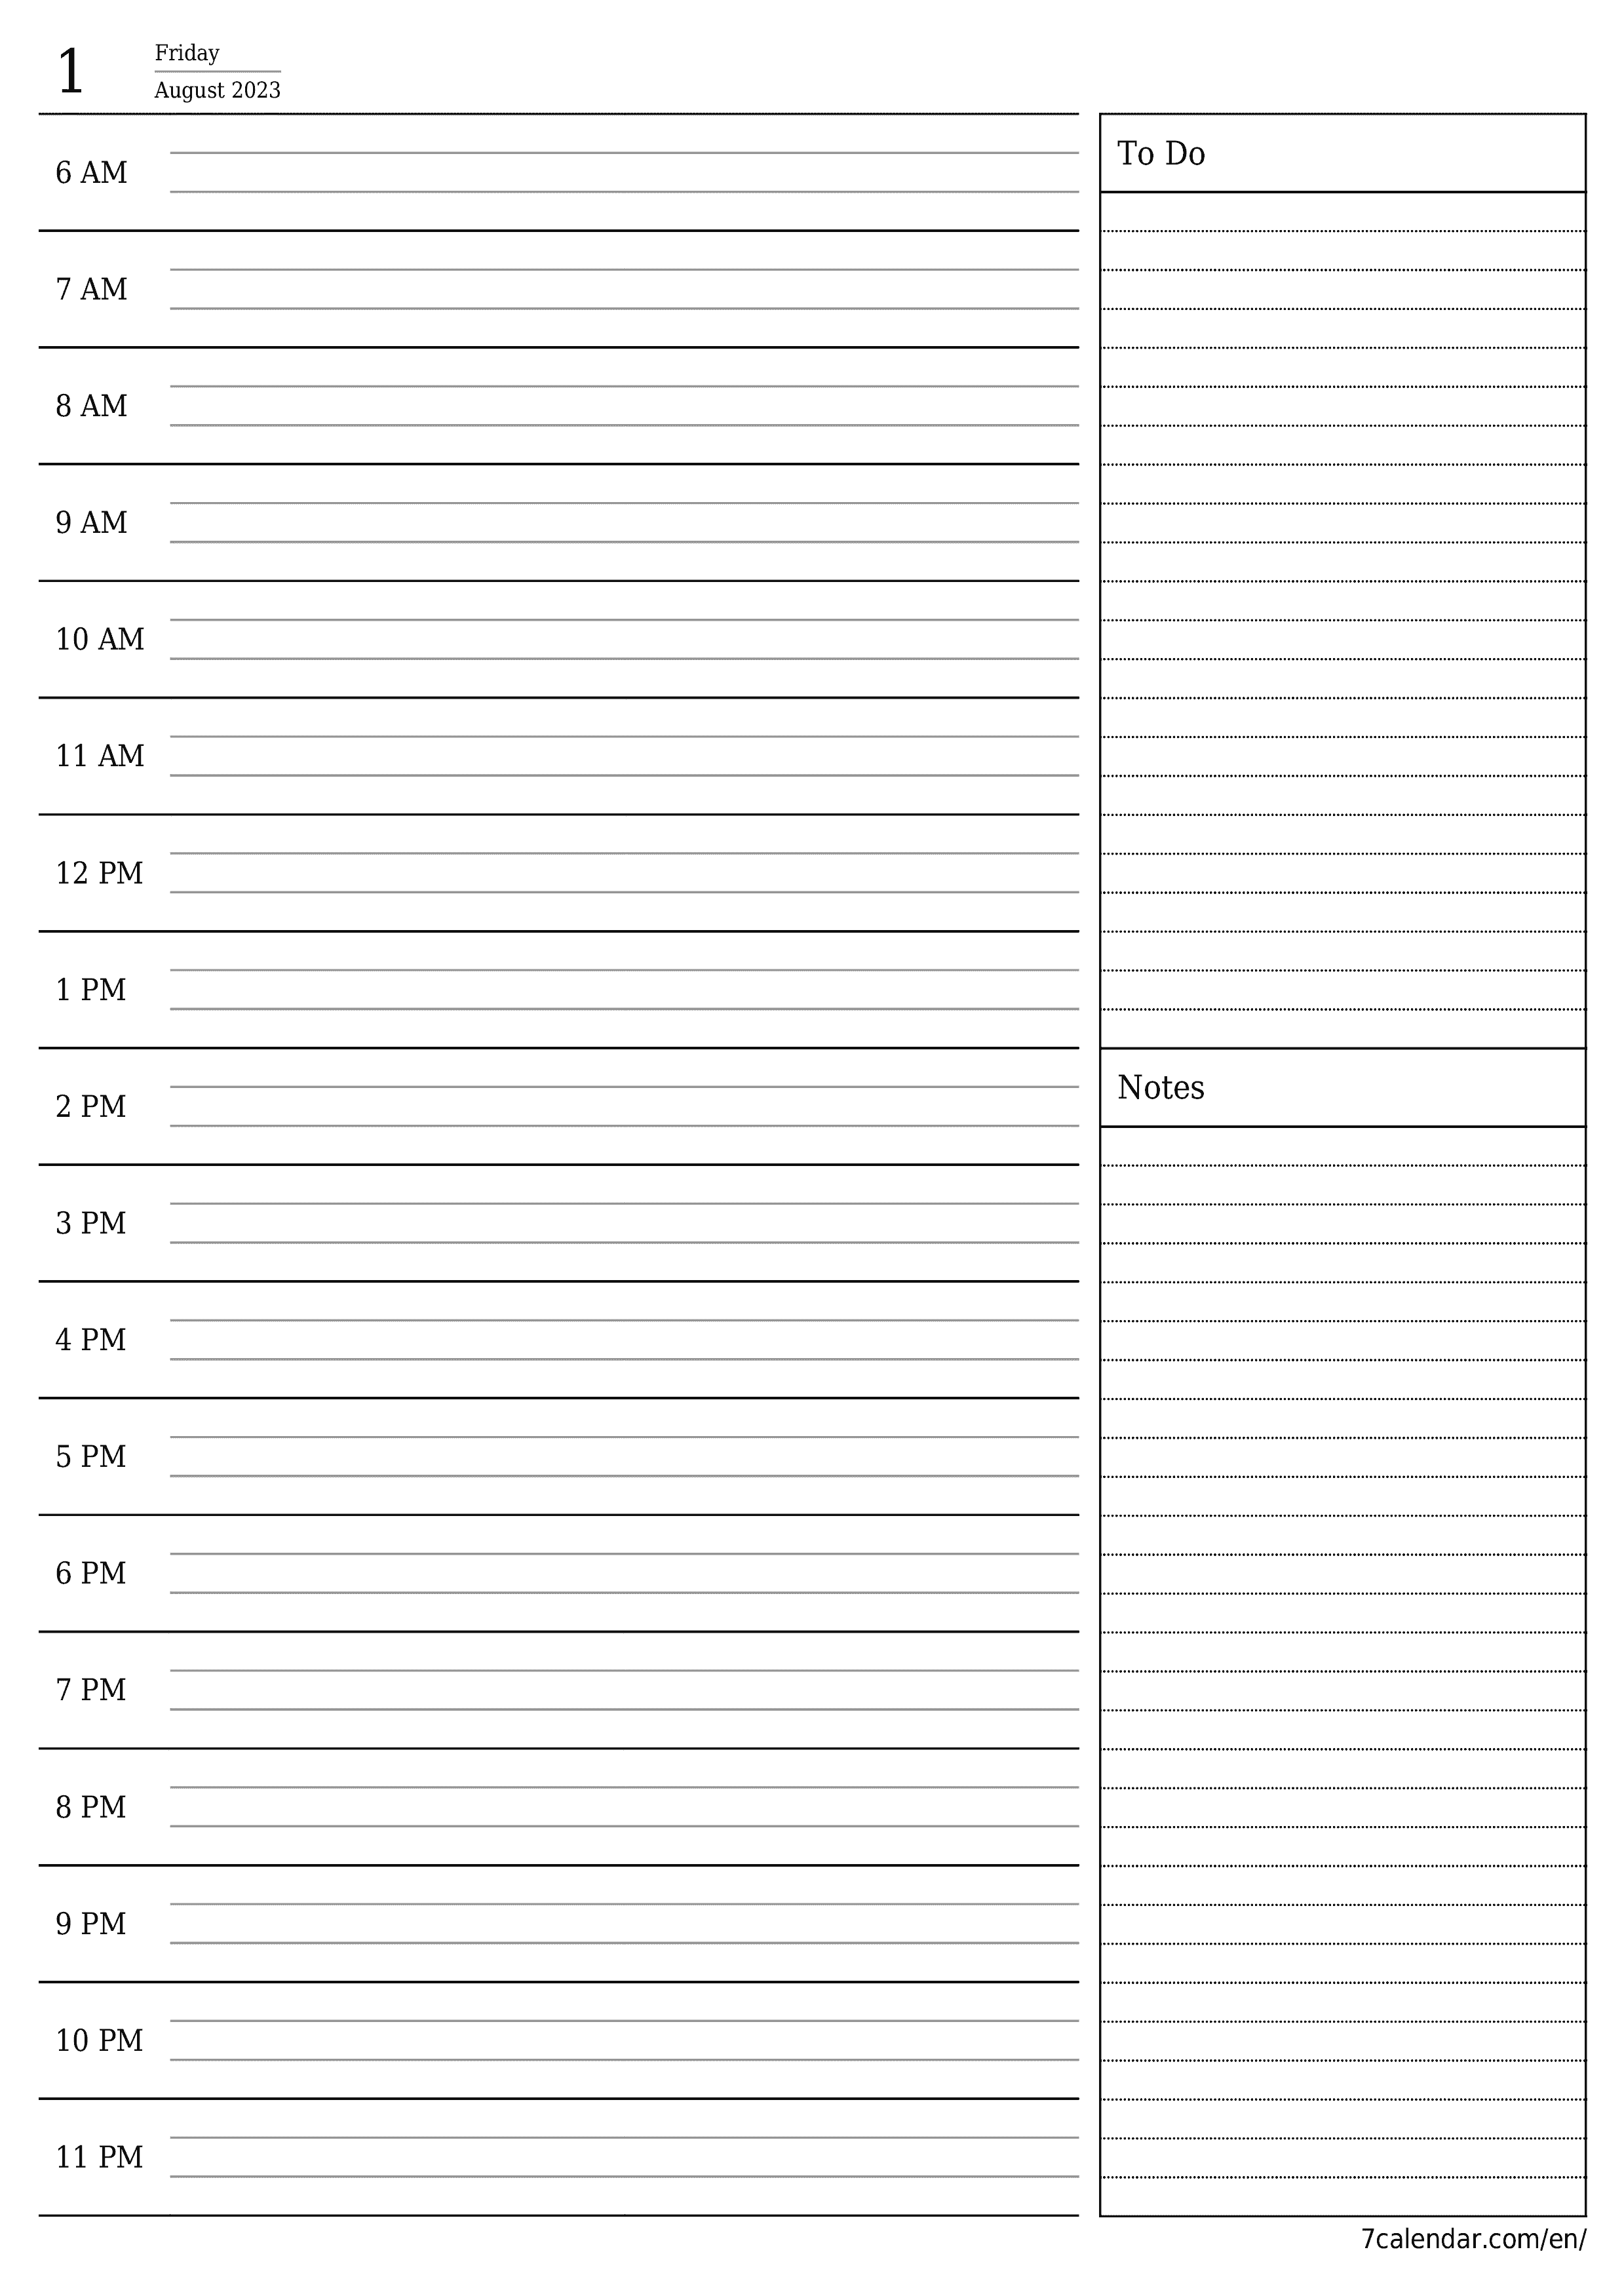 Blank daily calendar planner for day August 2023 with notes, save and print to PDF PNG English - 7calendar.com